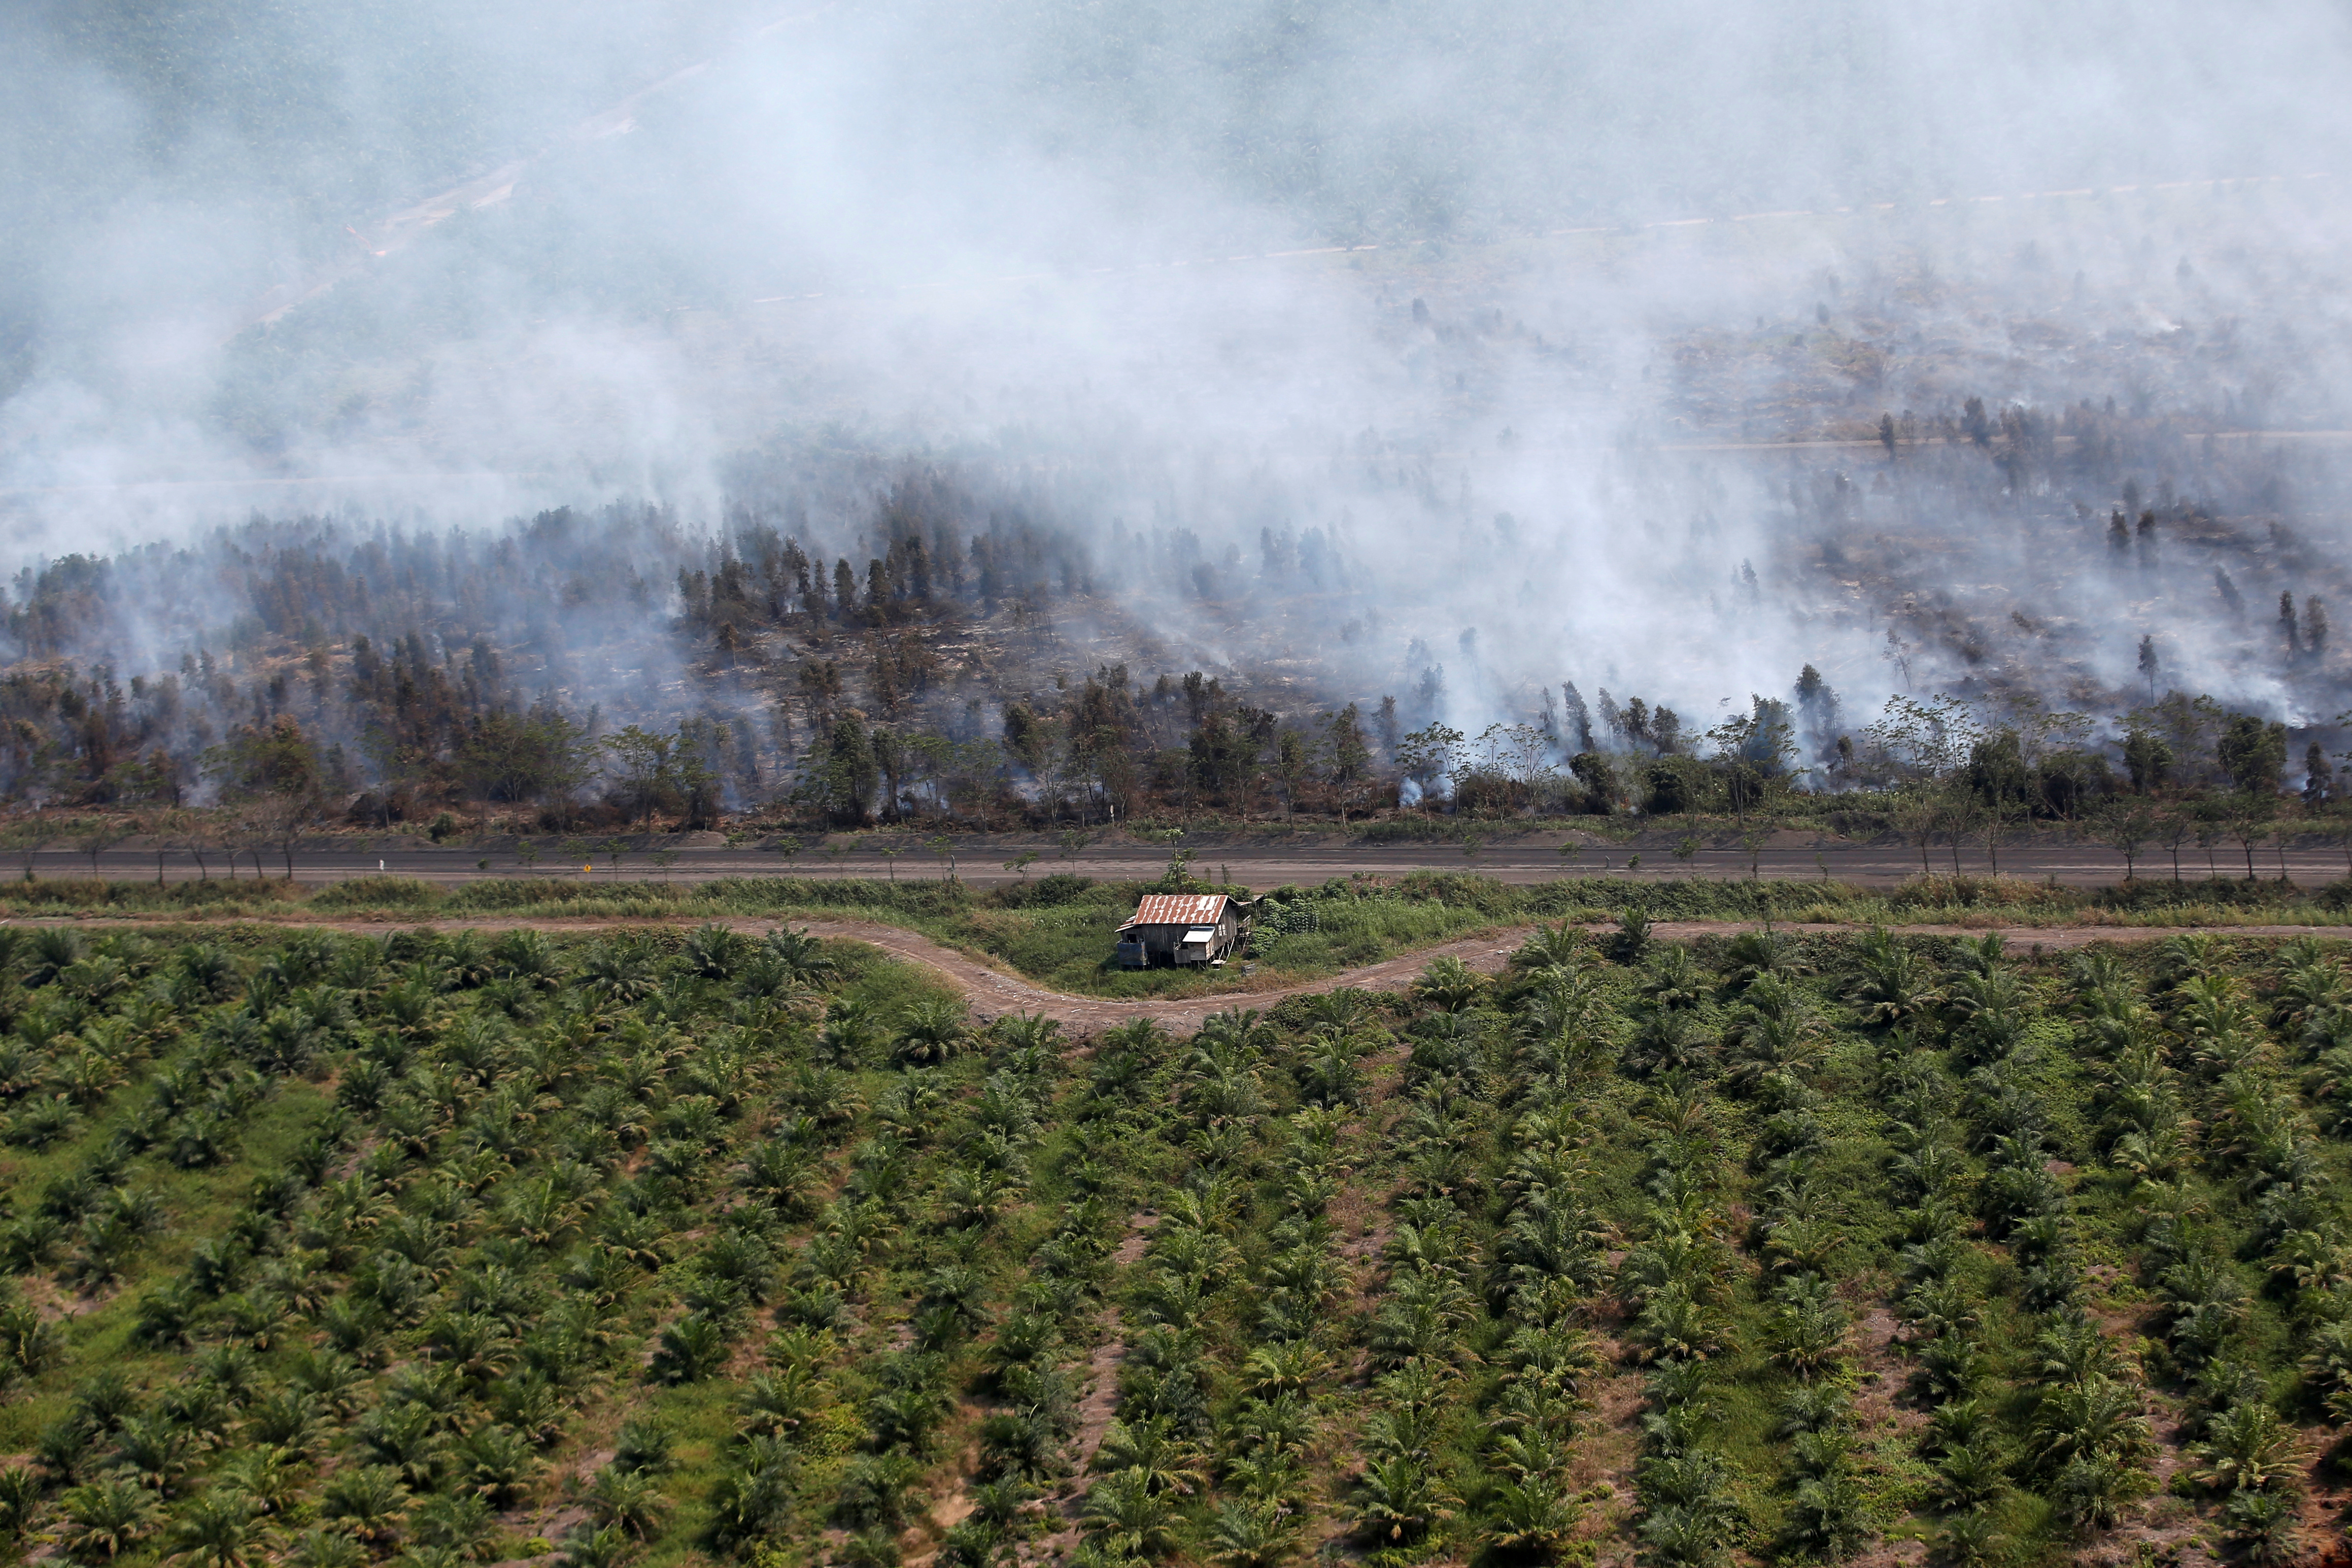 A wooden house is pictured at a palm oil plantation as smoke covers trees due to the forest fires near Banjarmasin